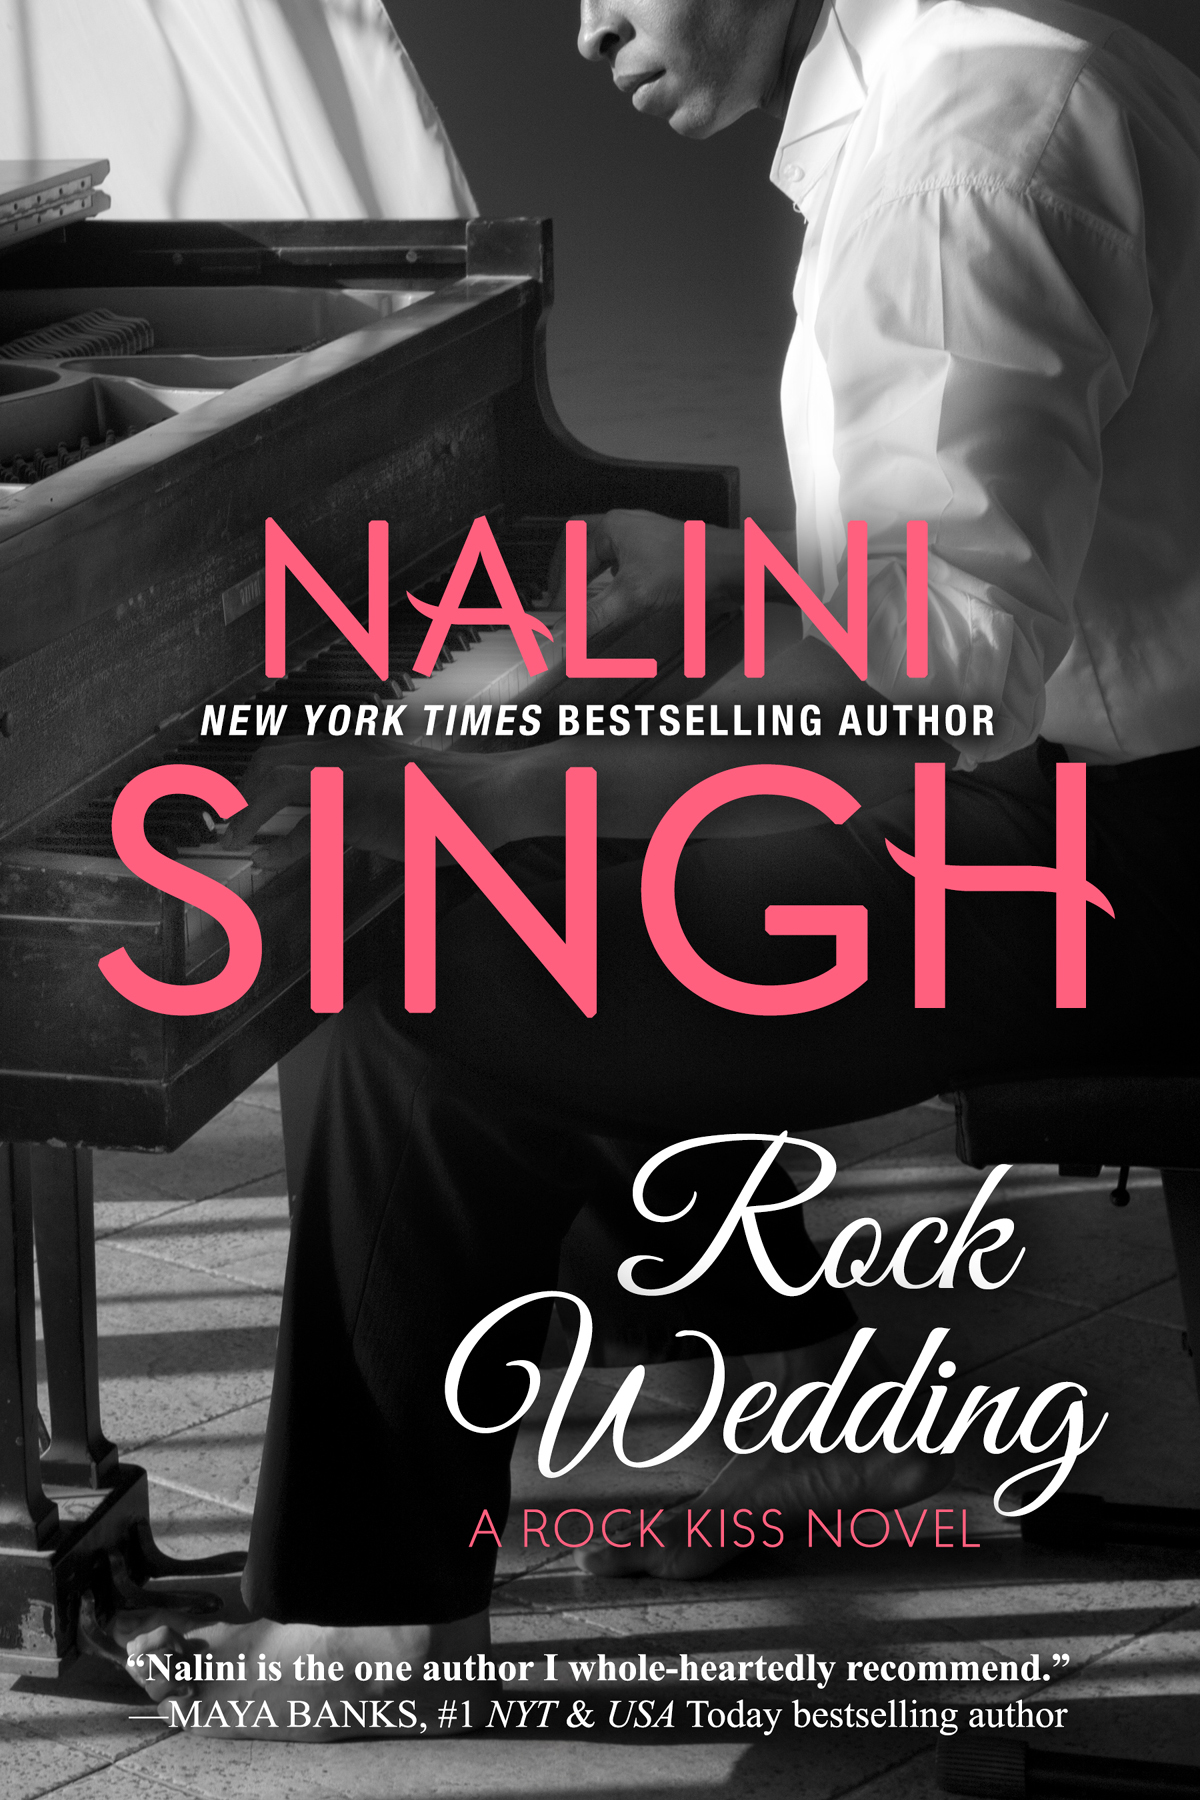 This image is the cover for the book Rock Wedding